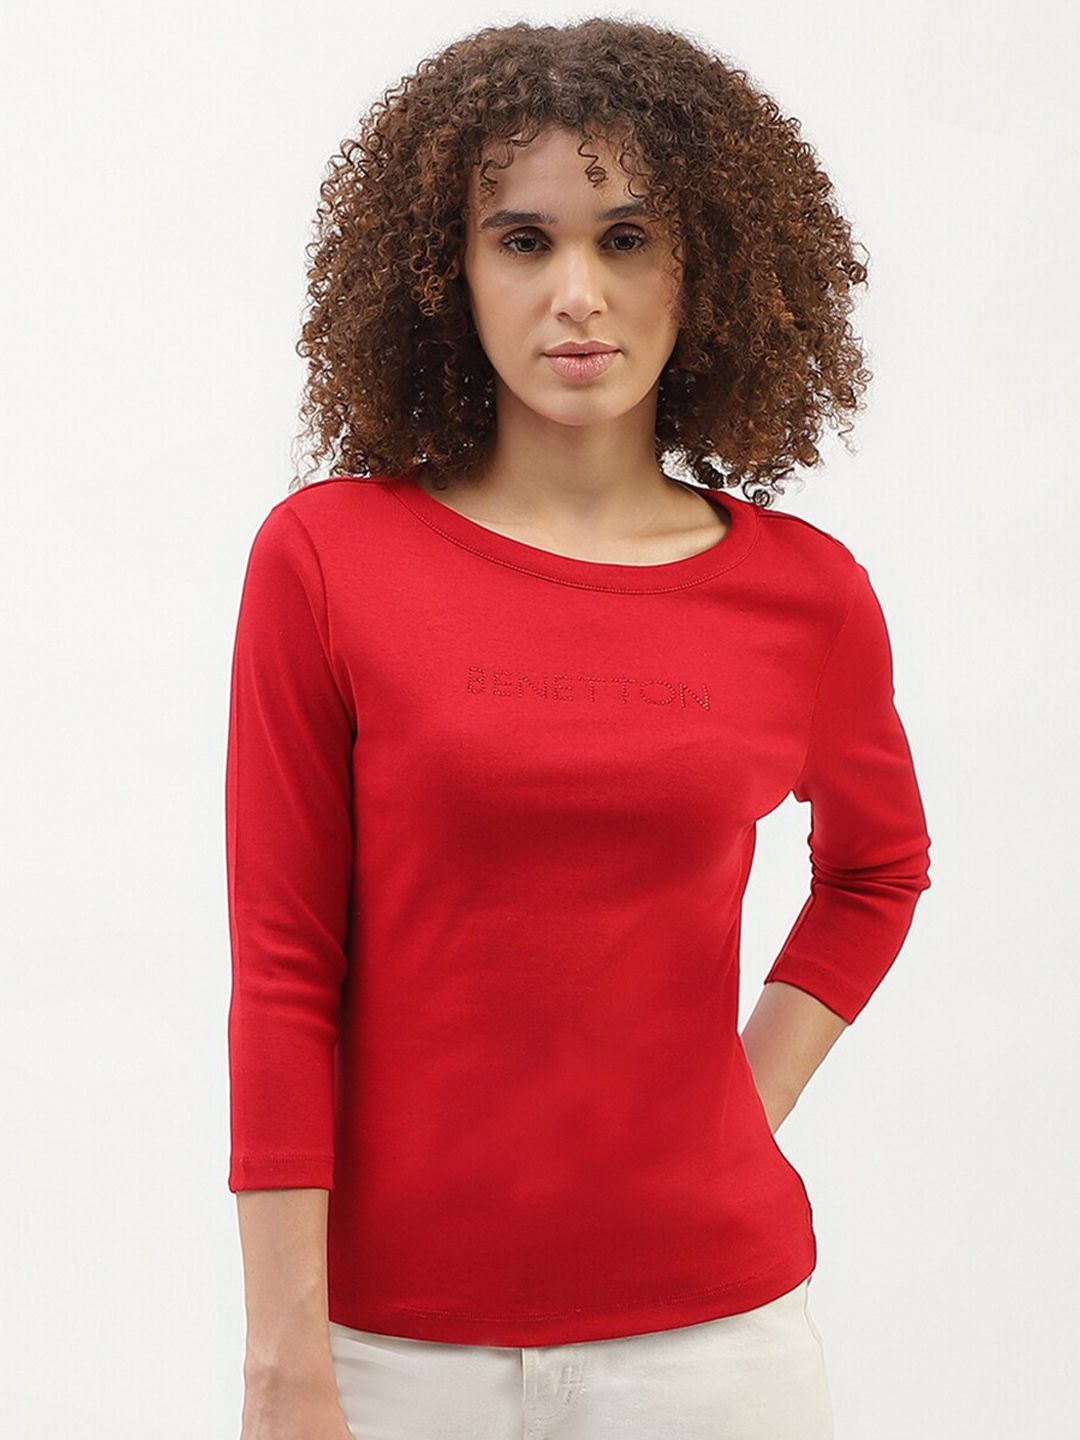 United Colors of Benetton Embellished Cotton Top Price in India